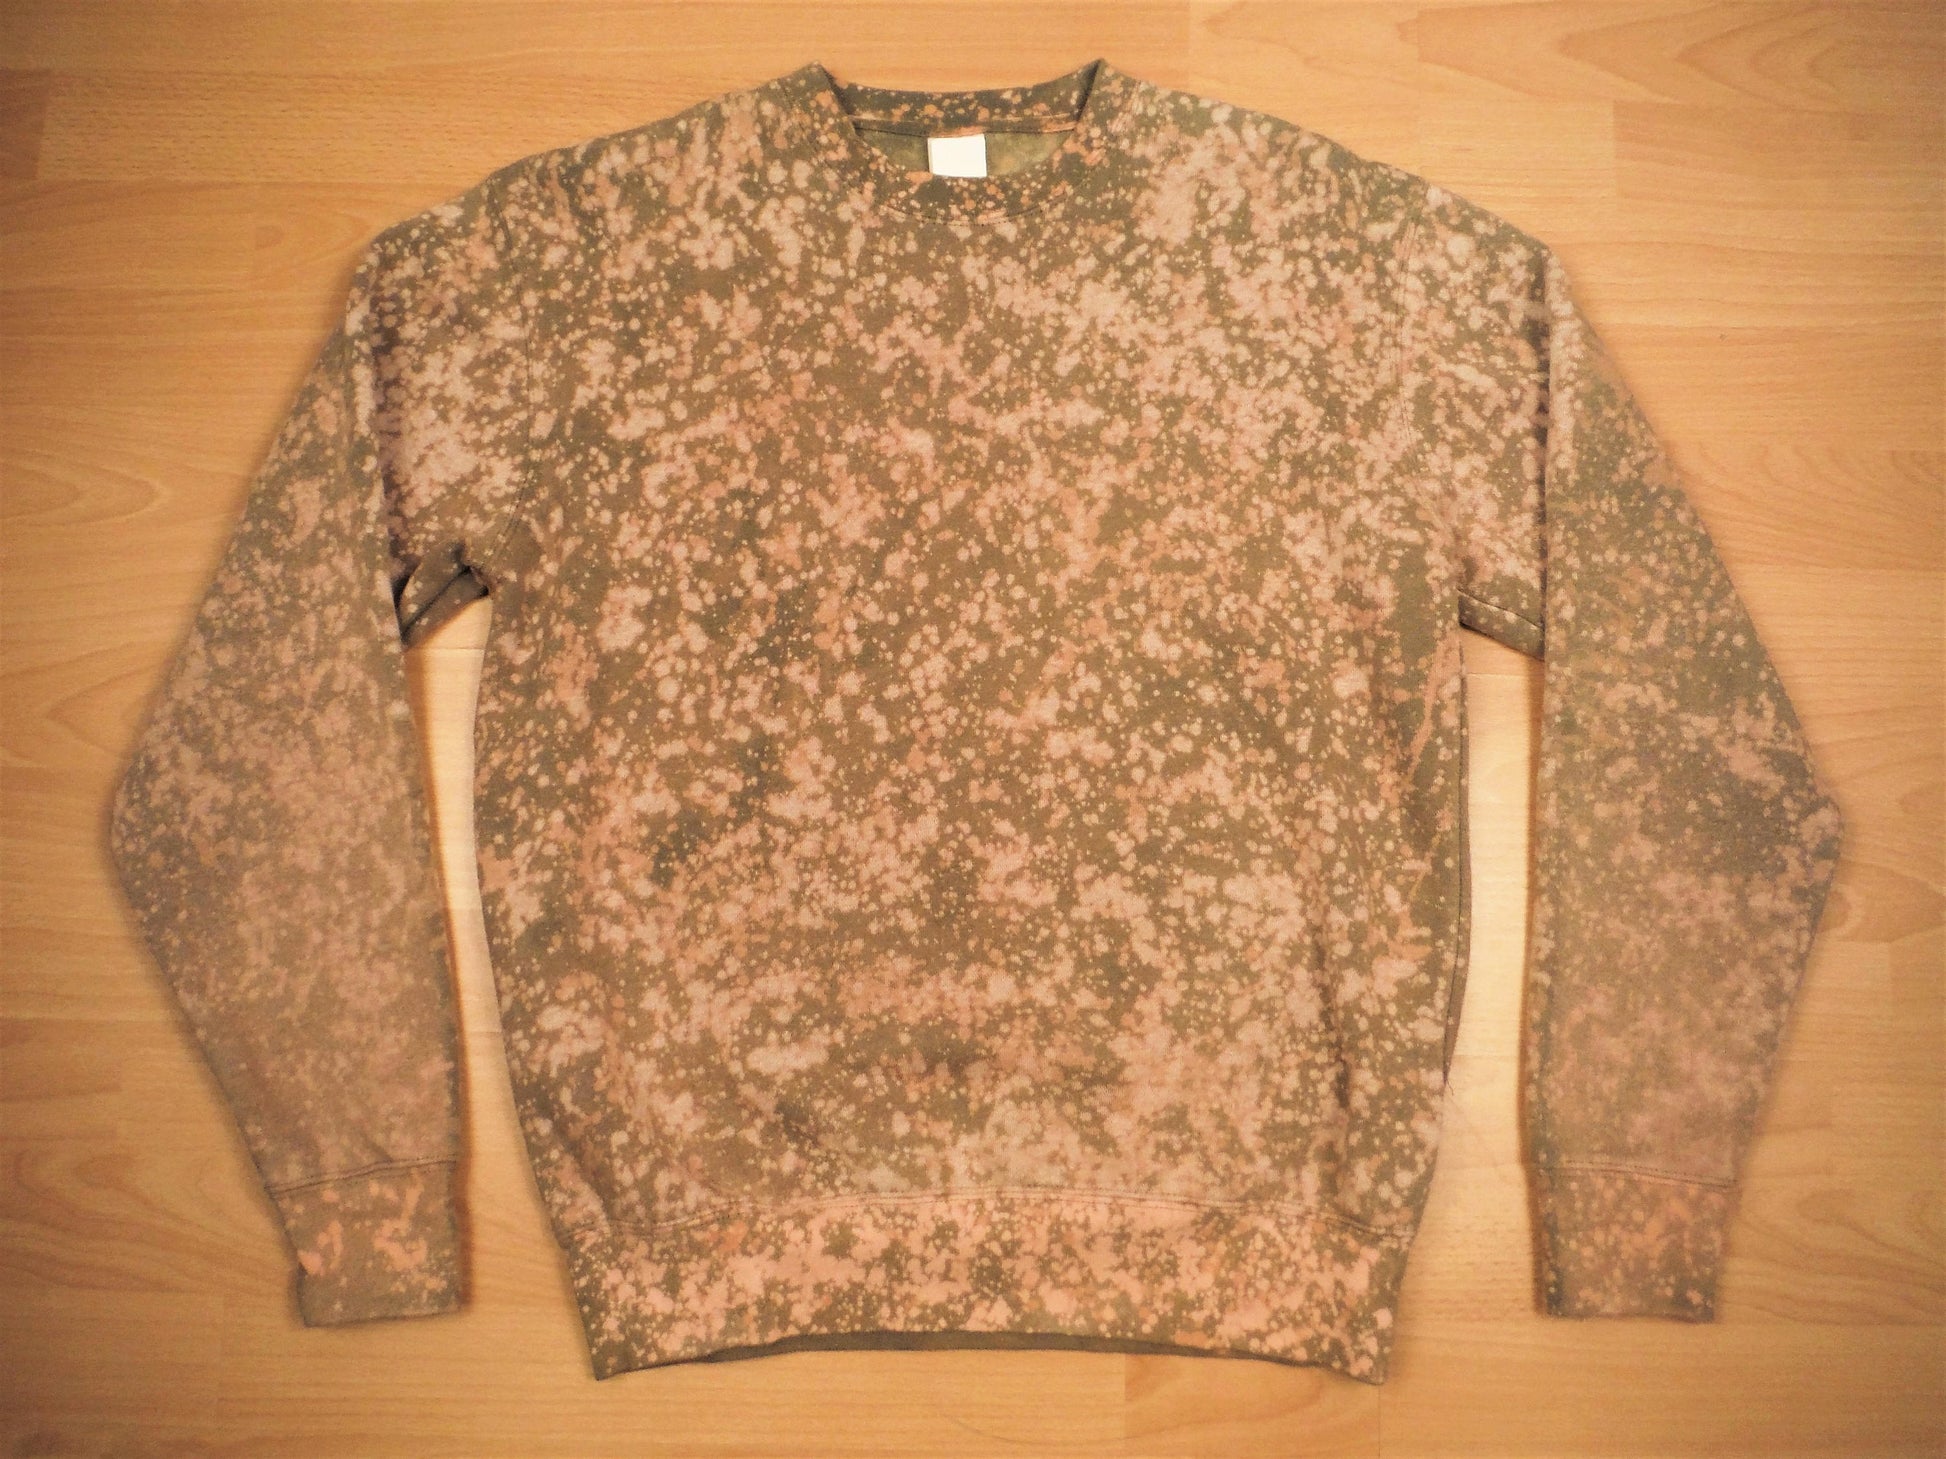 Olive Green/Grey Bleach Dyed Sweatshirt Hand Dyed Unisex Festival Jumper Rave Sweater - Bare Canvas